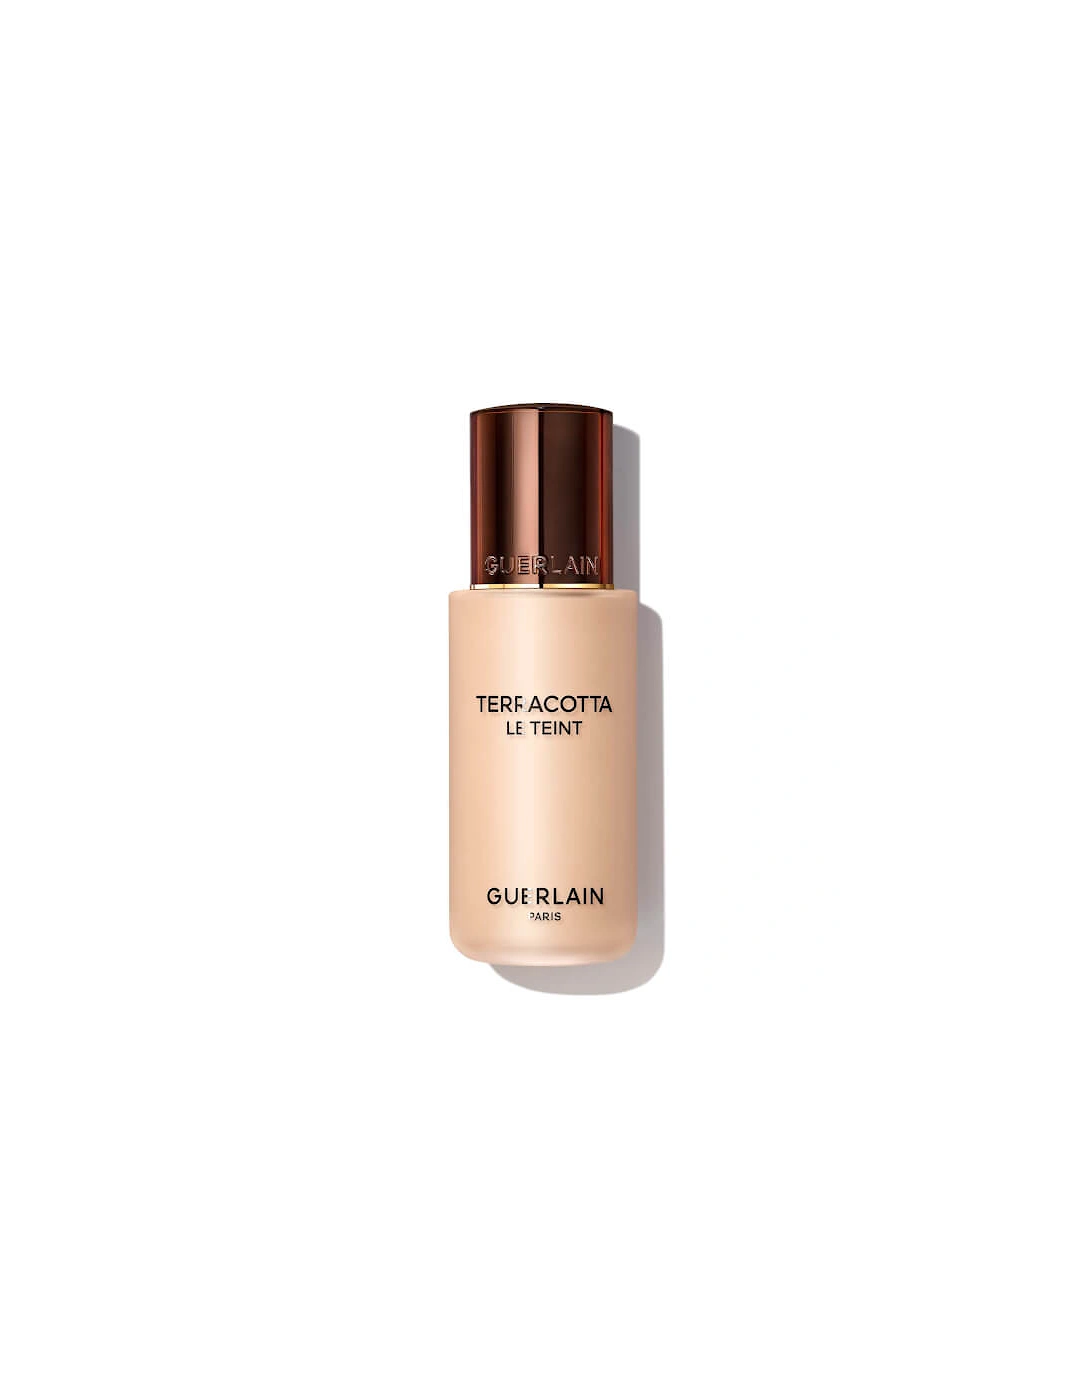 Terracotta Le Teint Healthy Glow Natural Perfection Foundation - 2C, 2 of 1